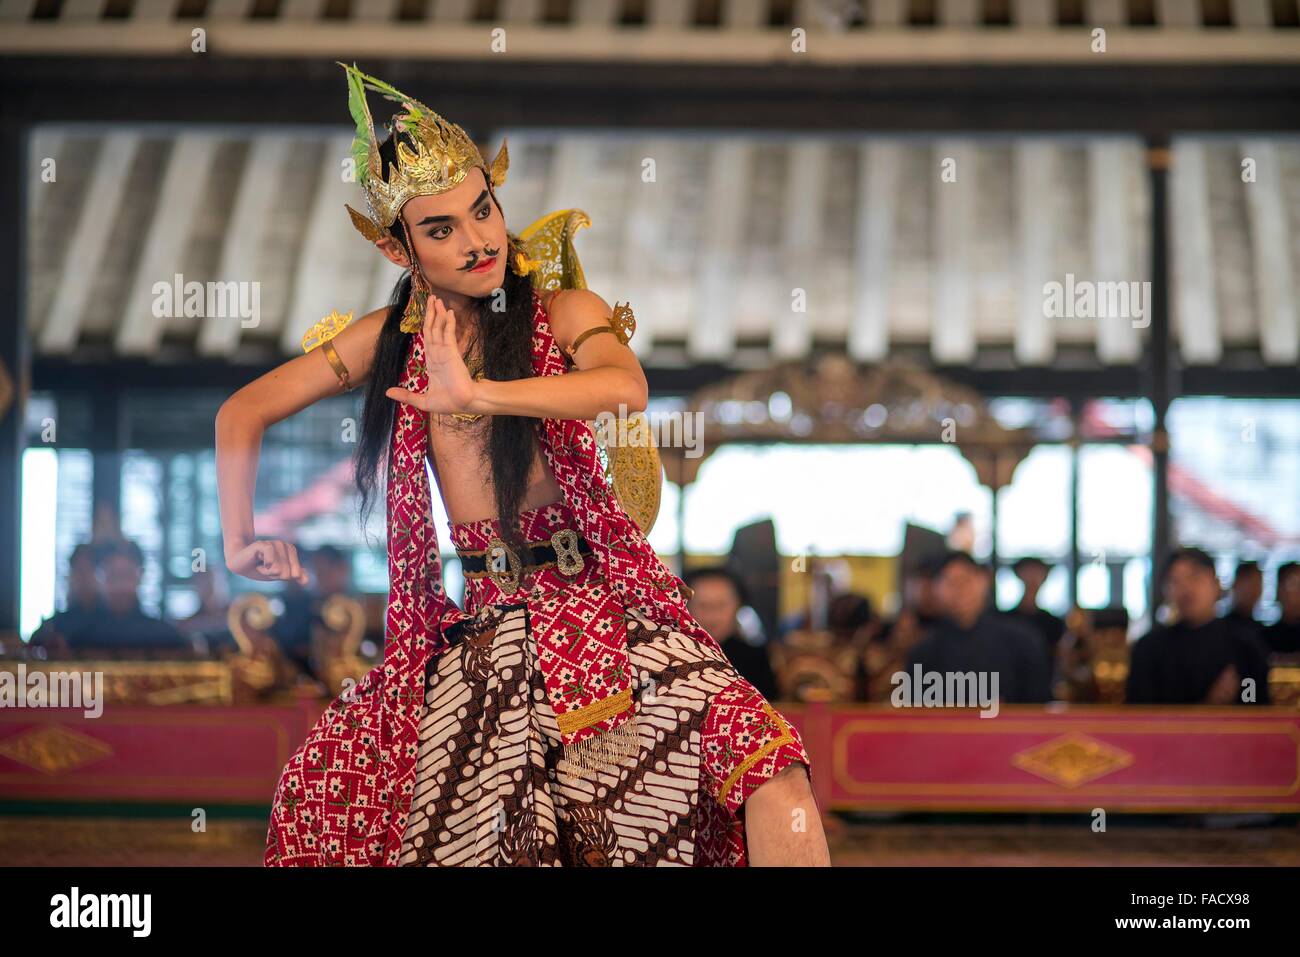 dancer  performing a traditional Javanese dance at The Sultan's Palace / Kraton, Yogyakarta, Java, Indonesia, Asia Stock Photo